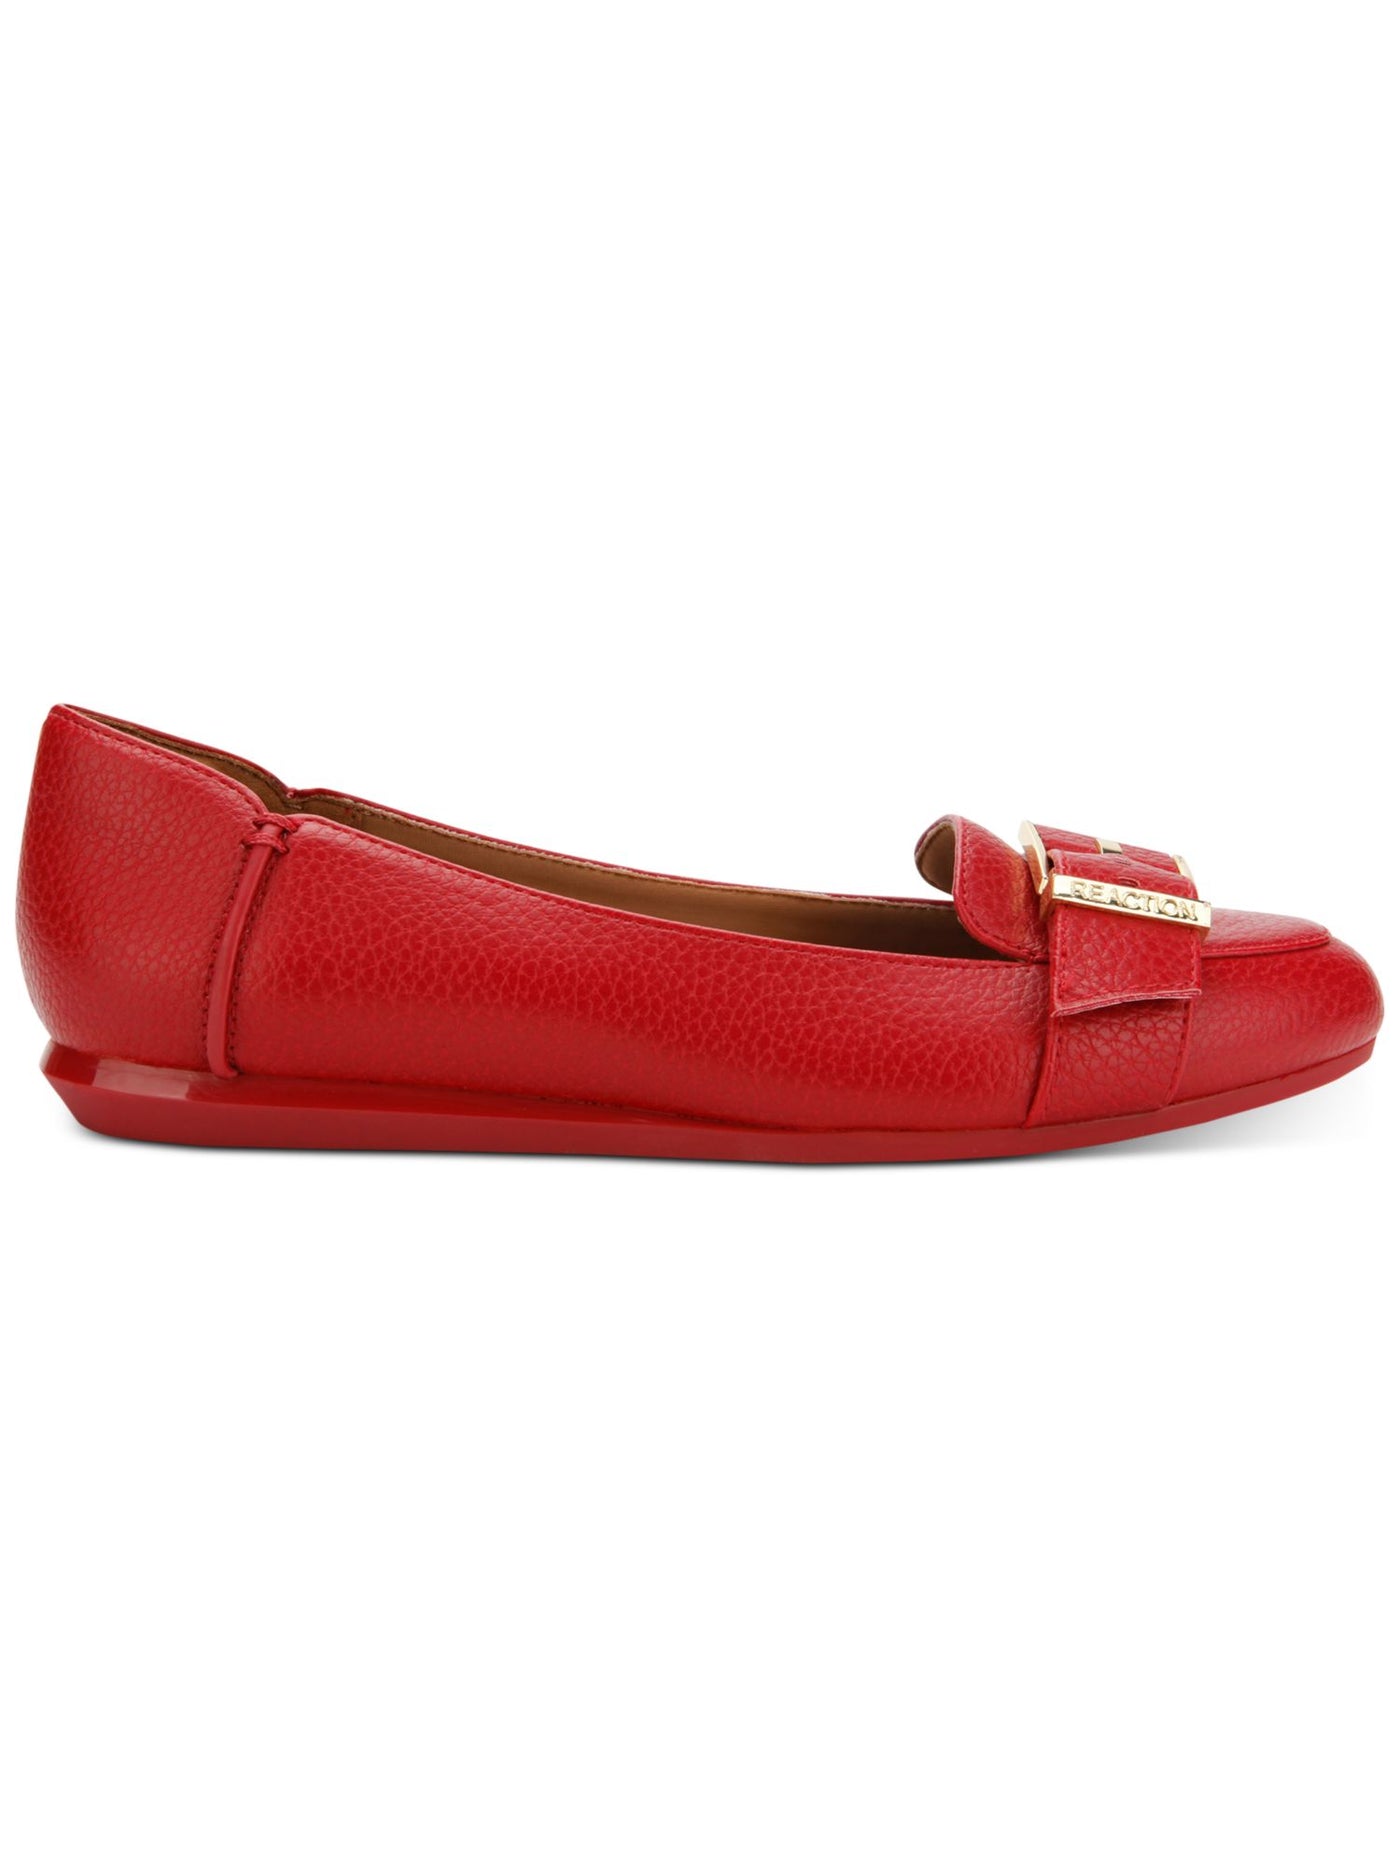 REACTION KENNETH COLE Womens Red Scale Print Contoured Footbed Buckle Accent Comfort Viv Round Toe Wedge Slip On Loafers Shoes 6 M